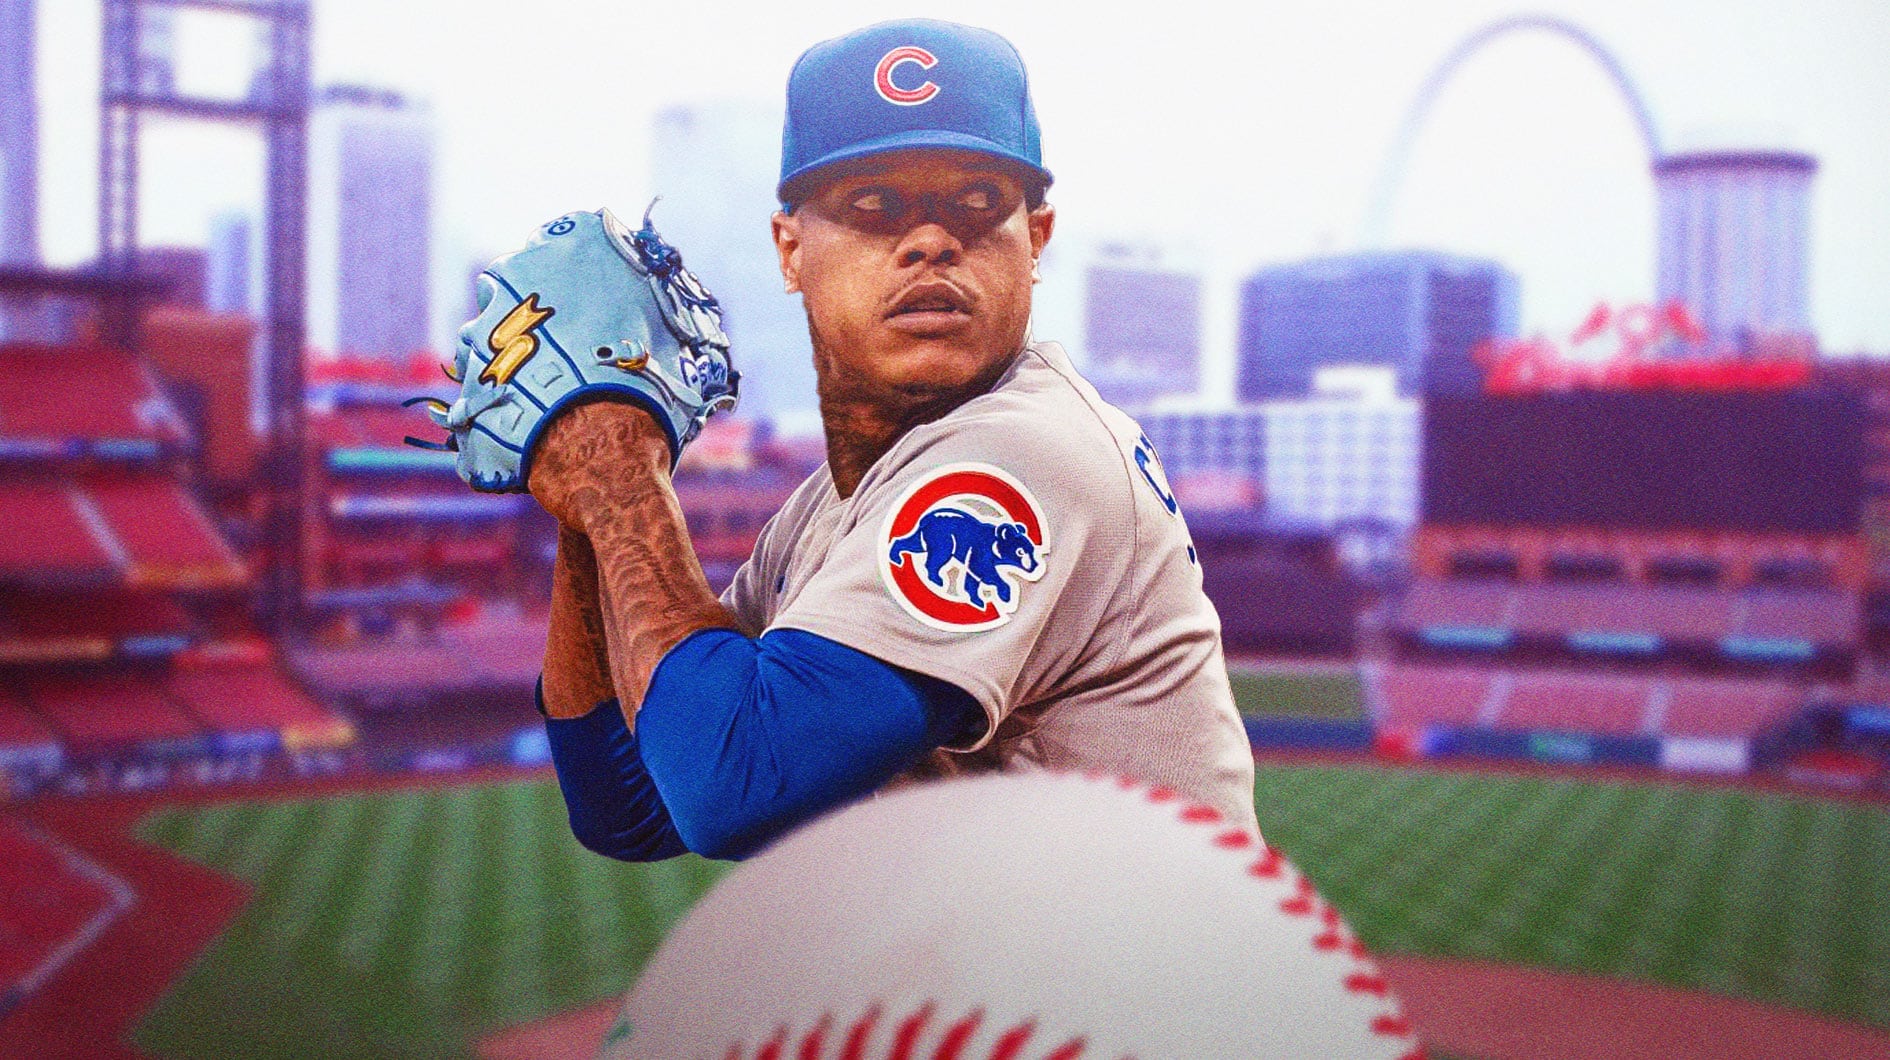 Marcus Stroman pitching in a Cubs uniform at Wrigley Field